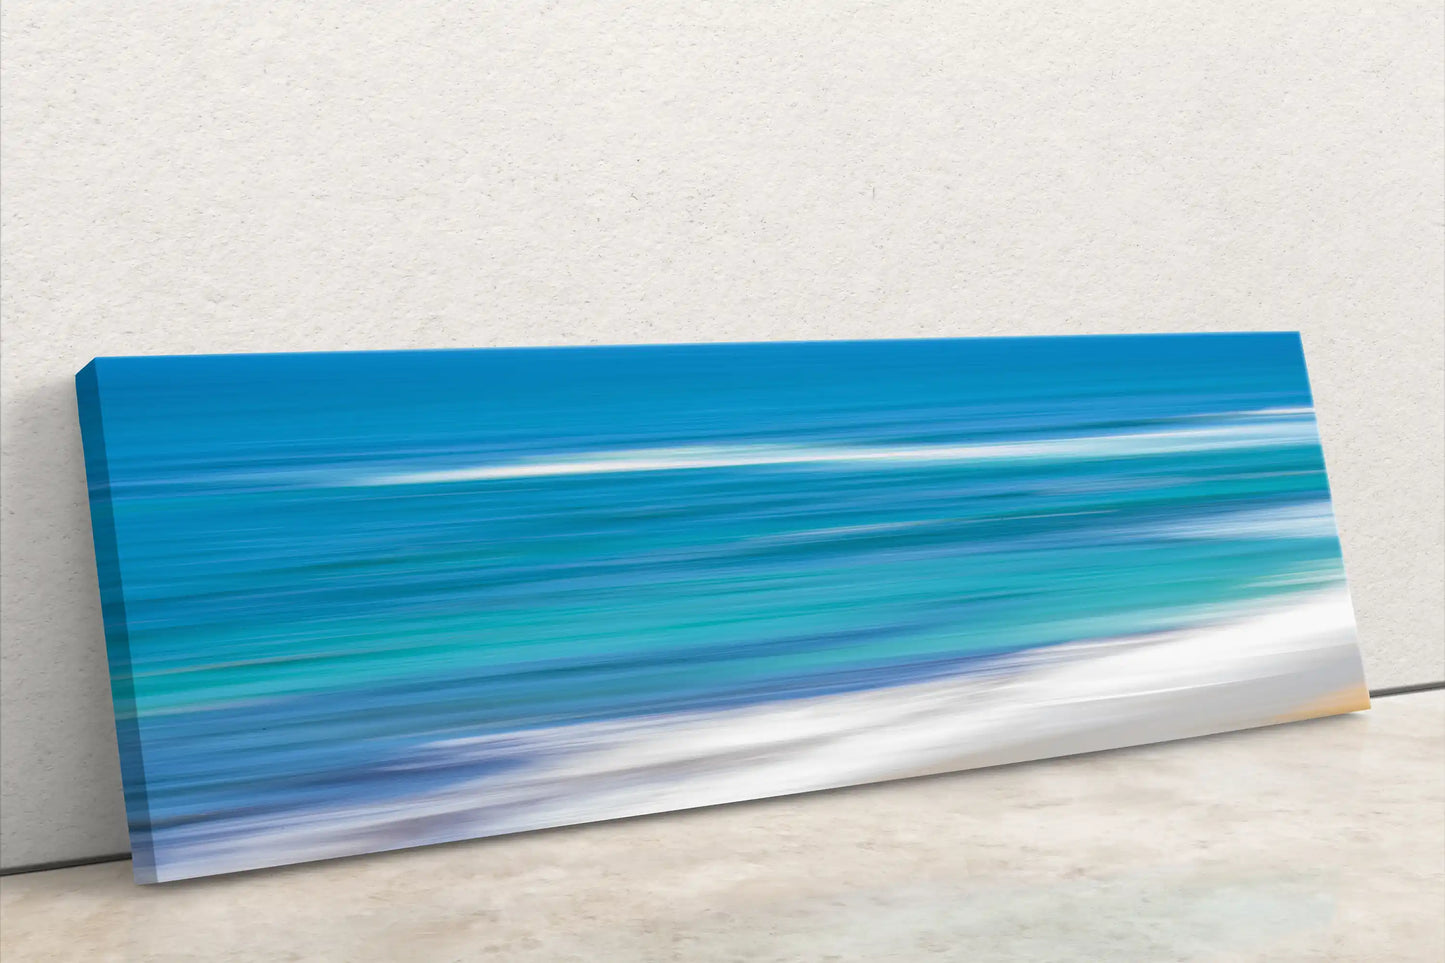 Blue Ocean abstract panorama art on canvas leaning against wall